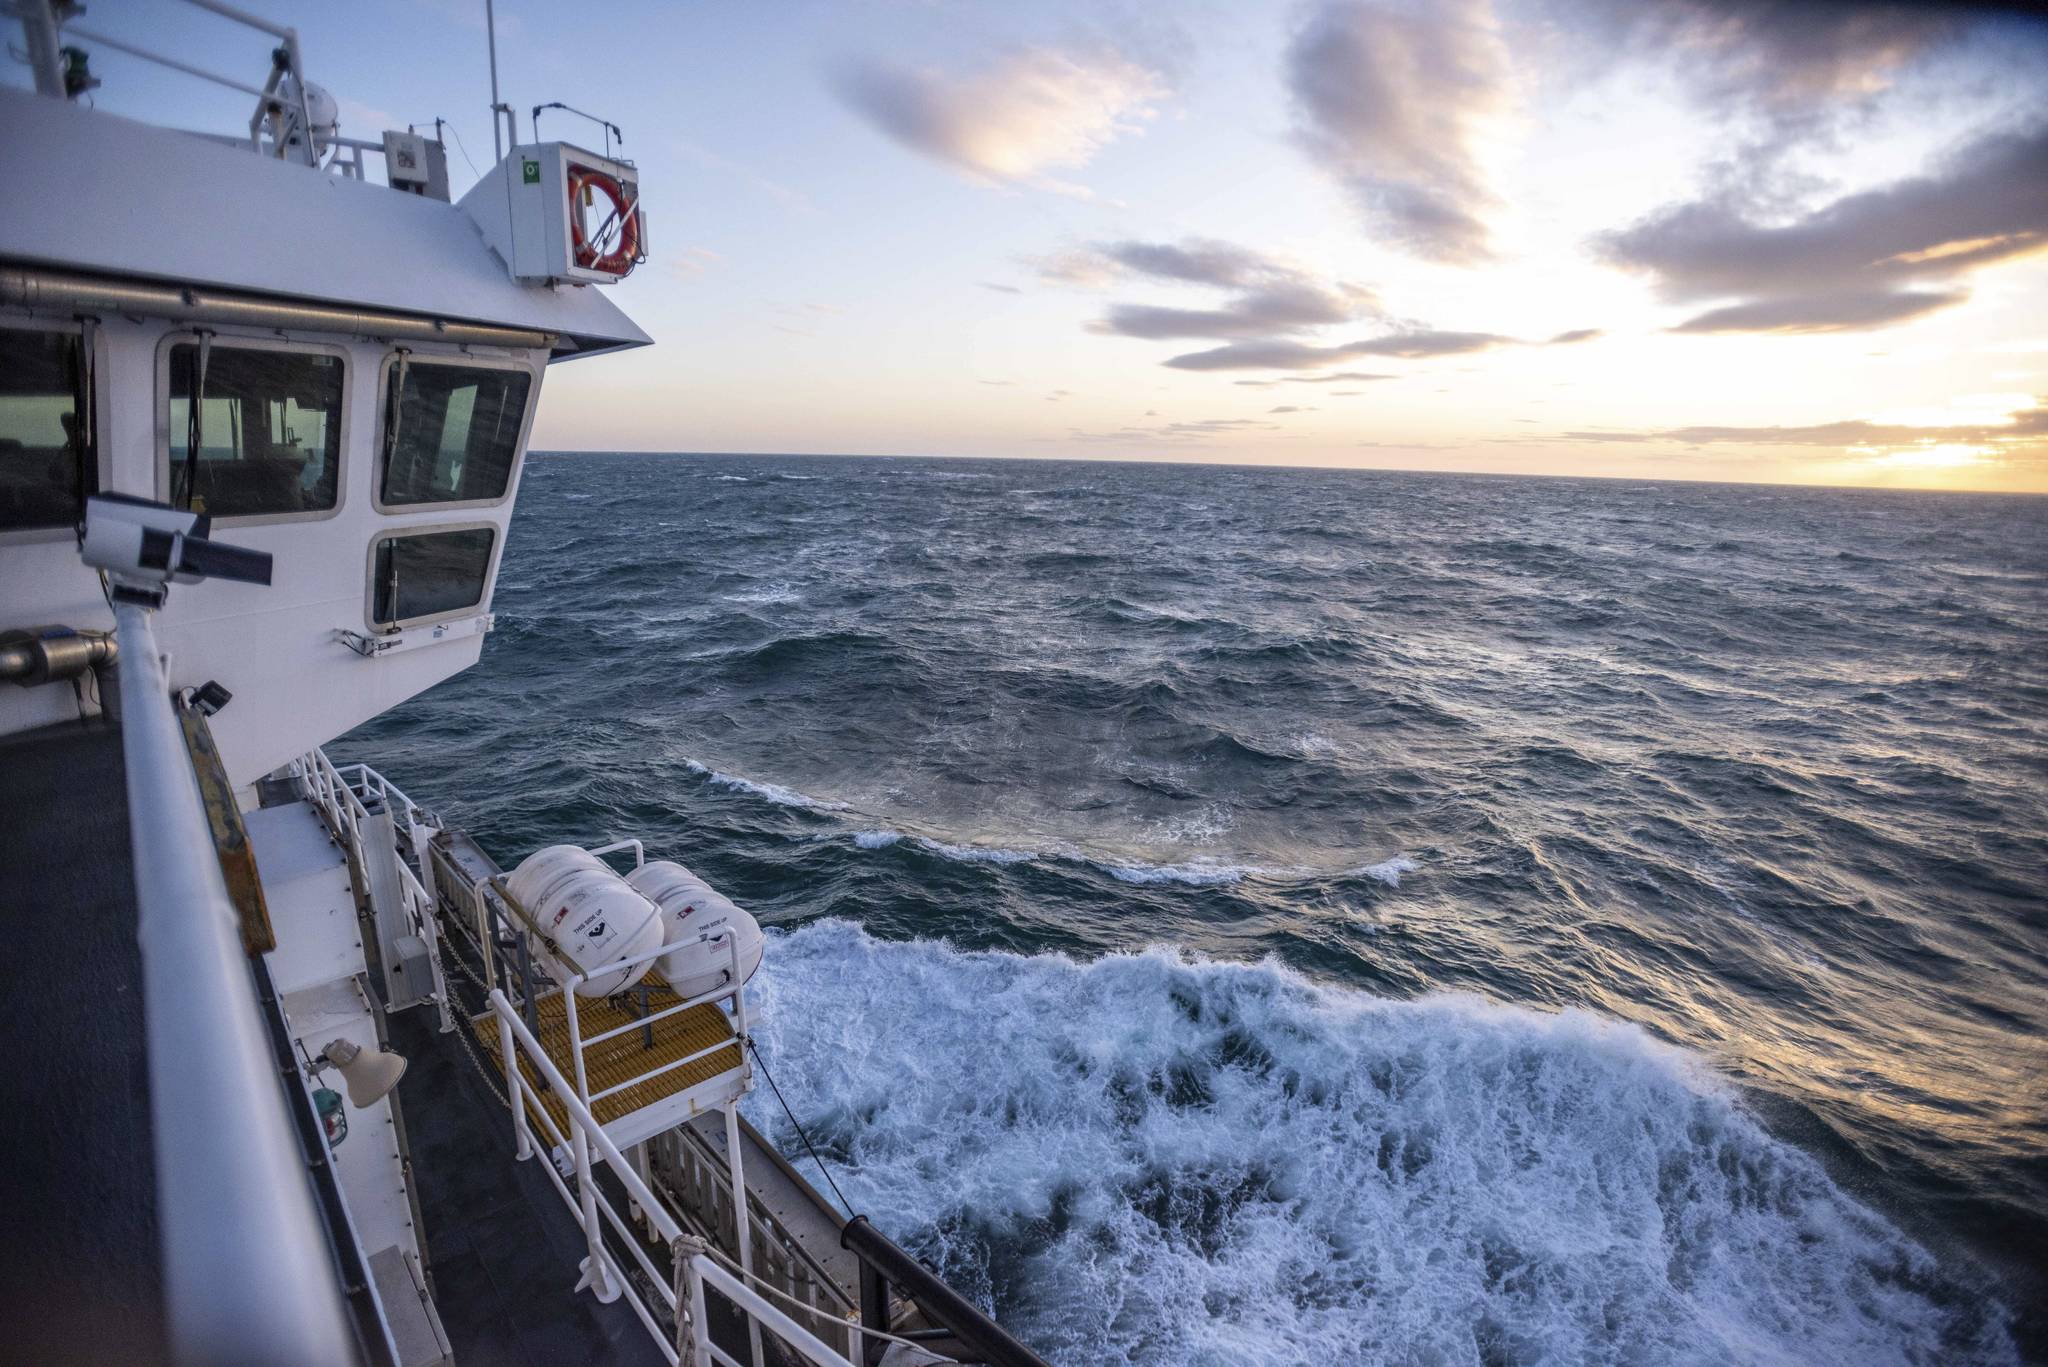 This Nov. 8, 2019, photo provided by John Guillote shows the Chukchi Sea from the top deck of the research vessel the Sikuliaq. University of Washington scientists onboard the research vessel are studying the changes and how less sea ice will affect coastlines, which already are vulnerable to erosion because increased waves delivered by storms. More erosion would increase the chance of winter flooding in villages and danger to hunters in small boats. (John Guillote via AP)